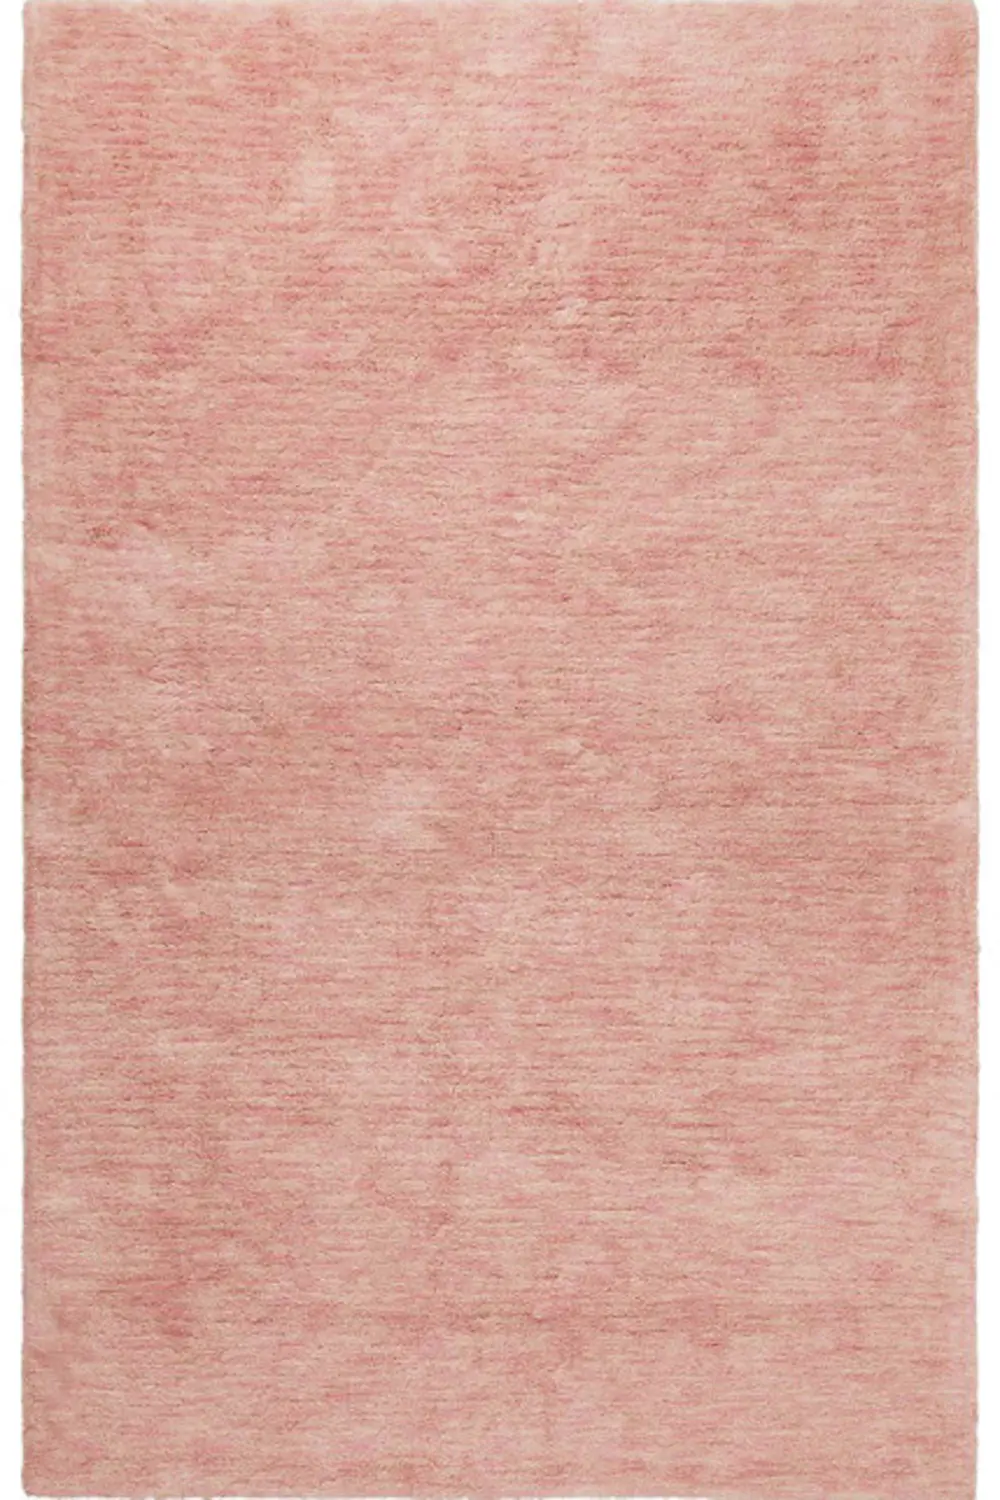 C-MIX-S-AARTY 3 x 5 Small Mix Aarty Flamingo Pink Washable Rug-1